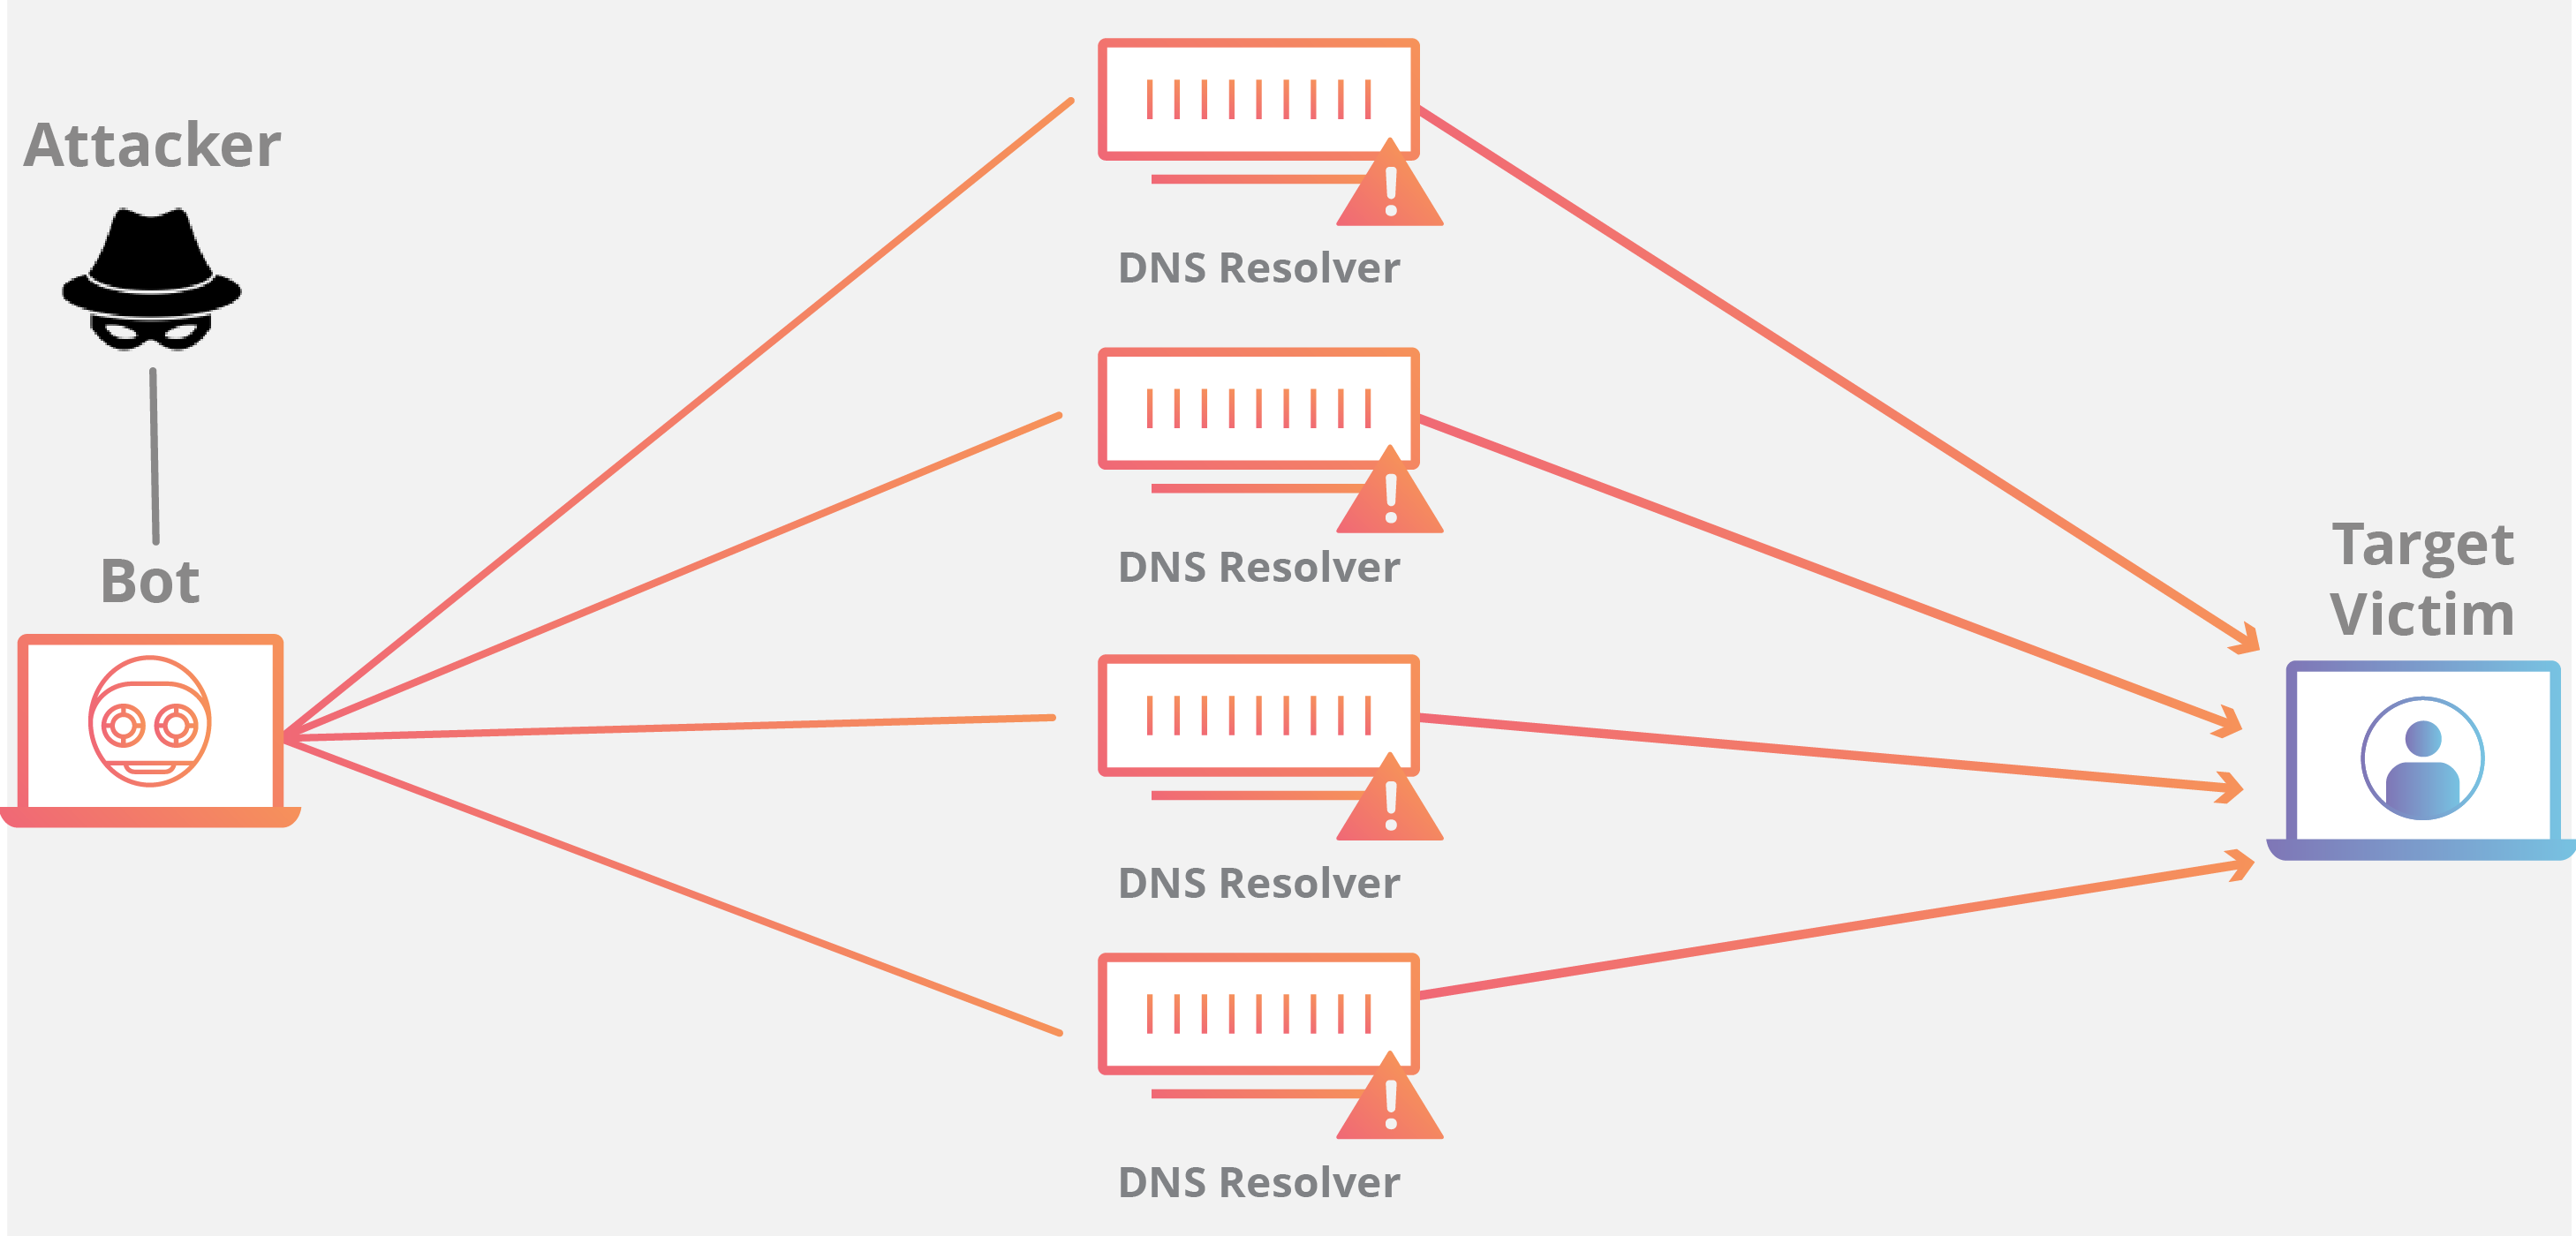 NTP-Amplification-DDoS-Angriff